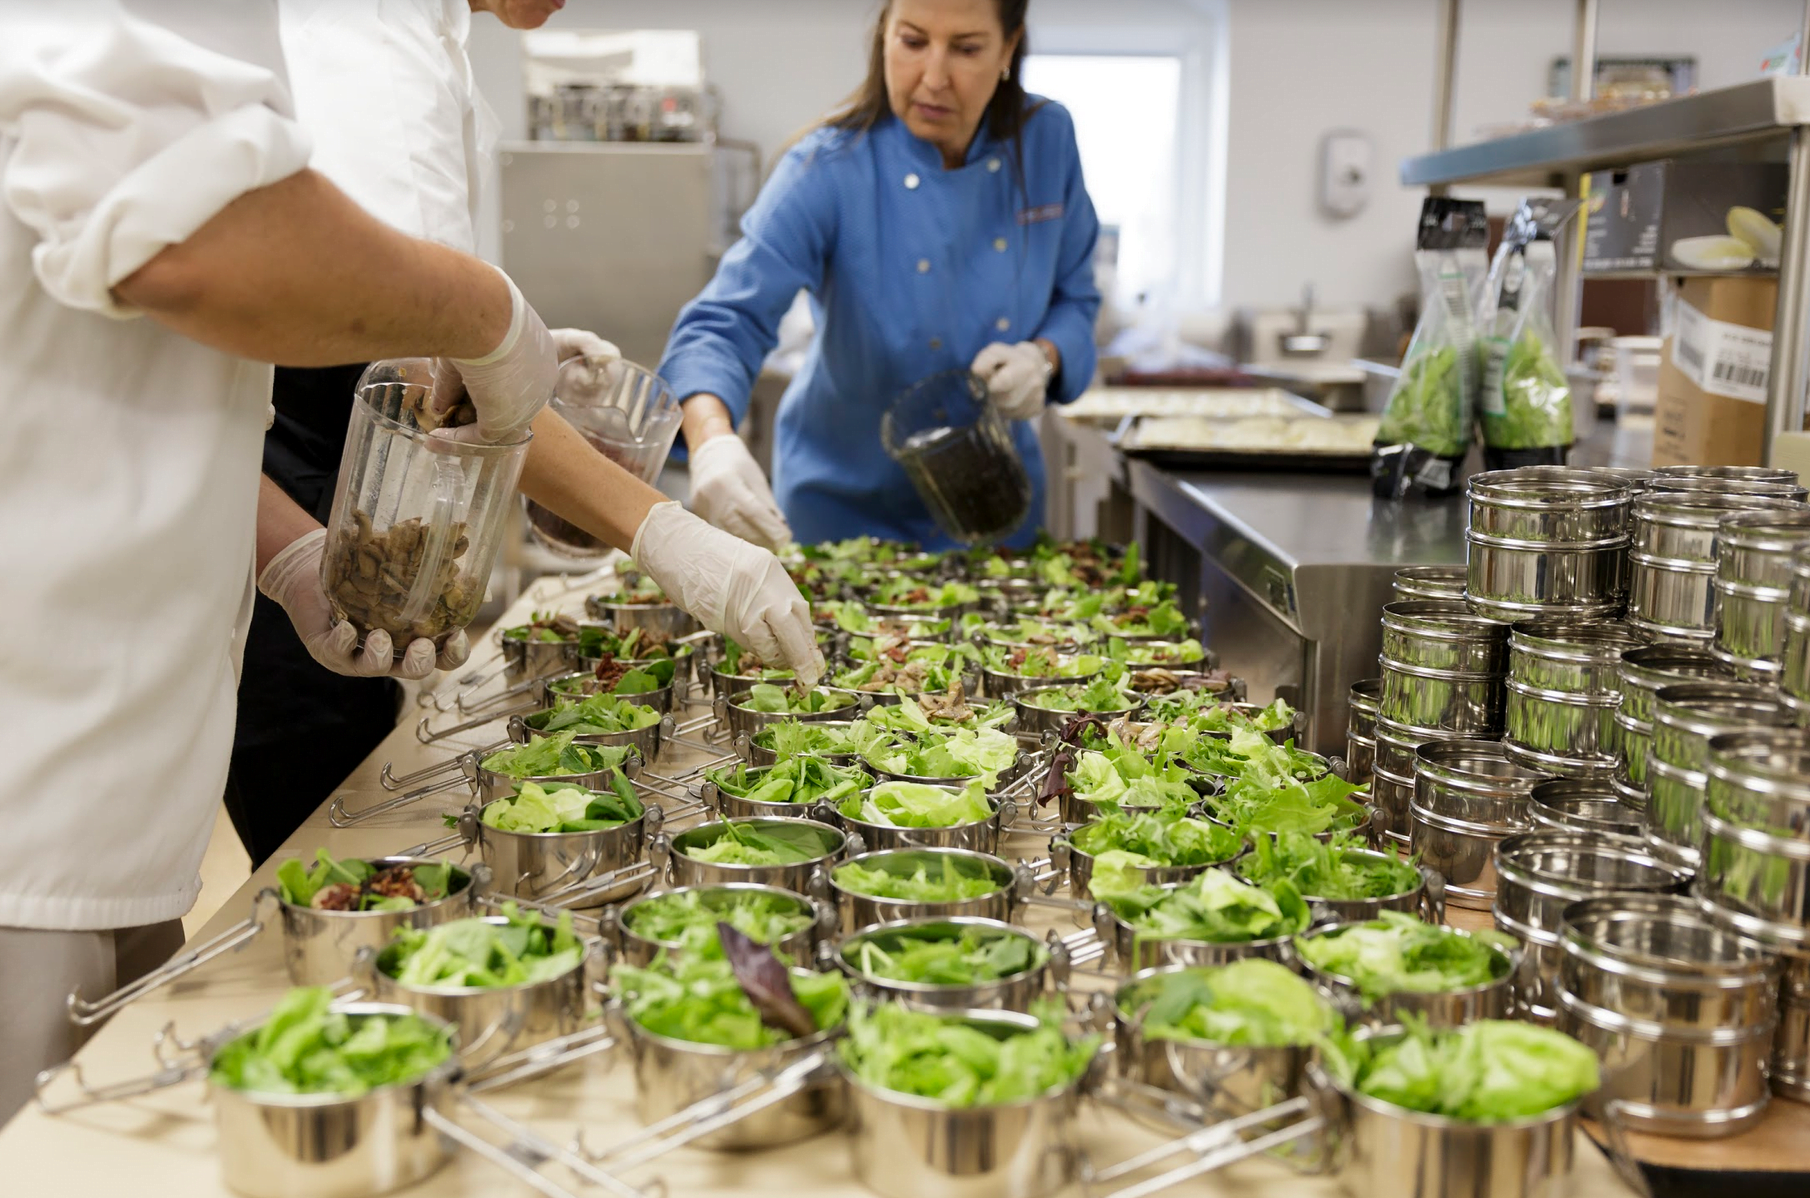 A zero-waste dinner featured local celebrity chefs preparing a meal that was 100% waste-free, with every component, from cookware to table centerpieces, either digestible or otherwise capable of being repurposed, April 26, 2018 Contributed photo